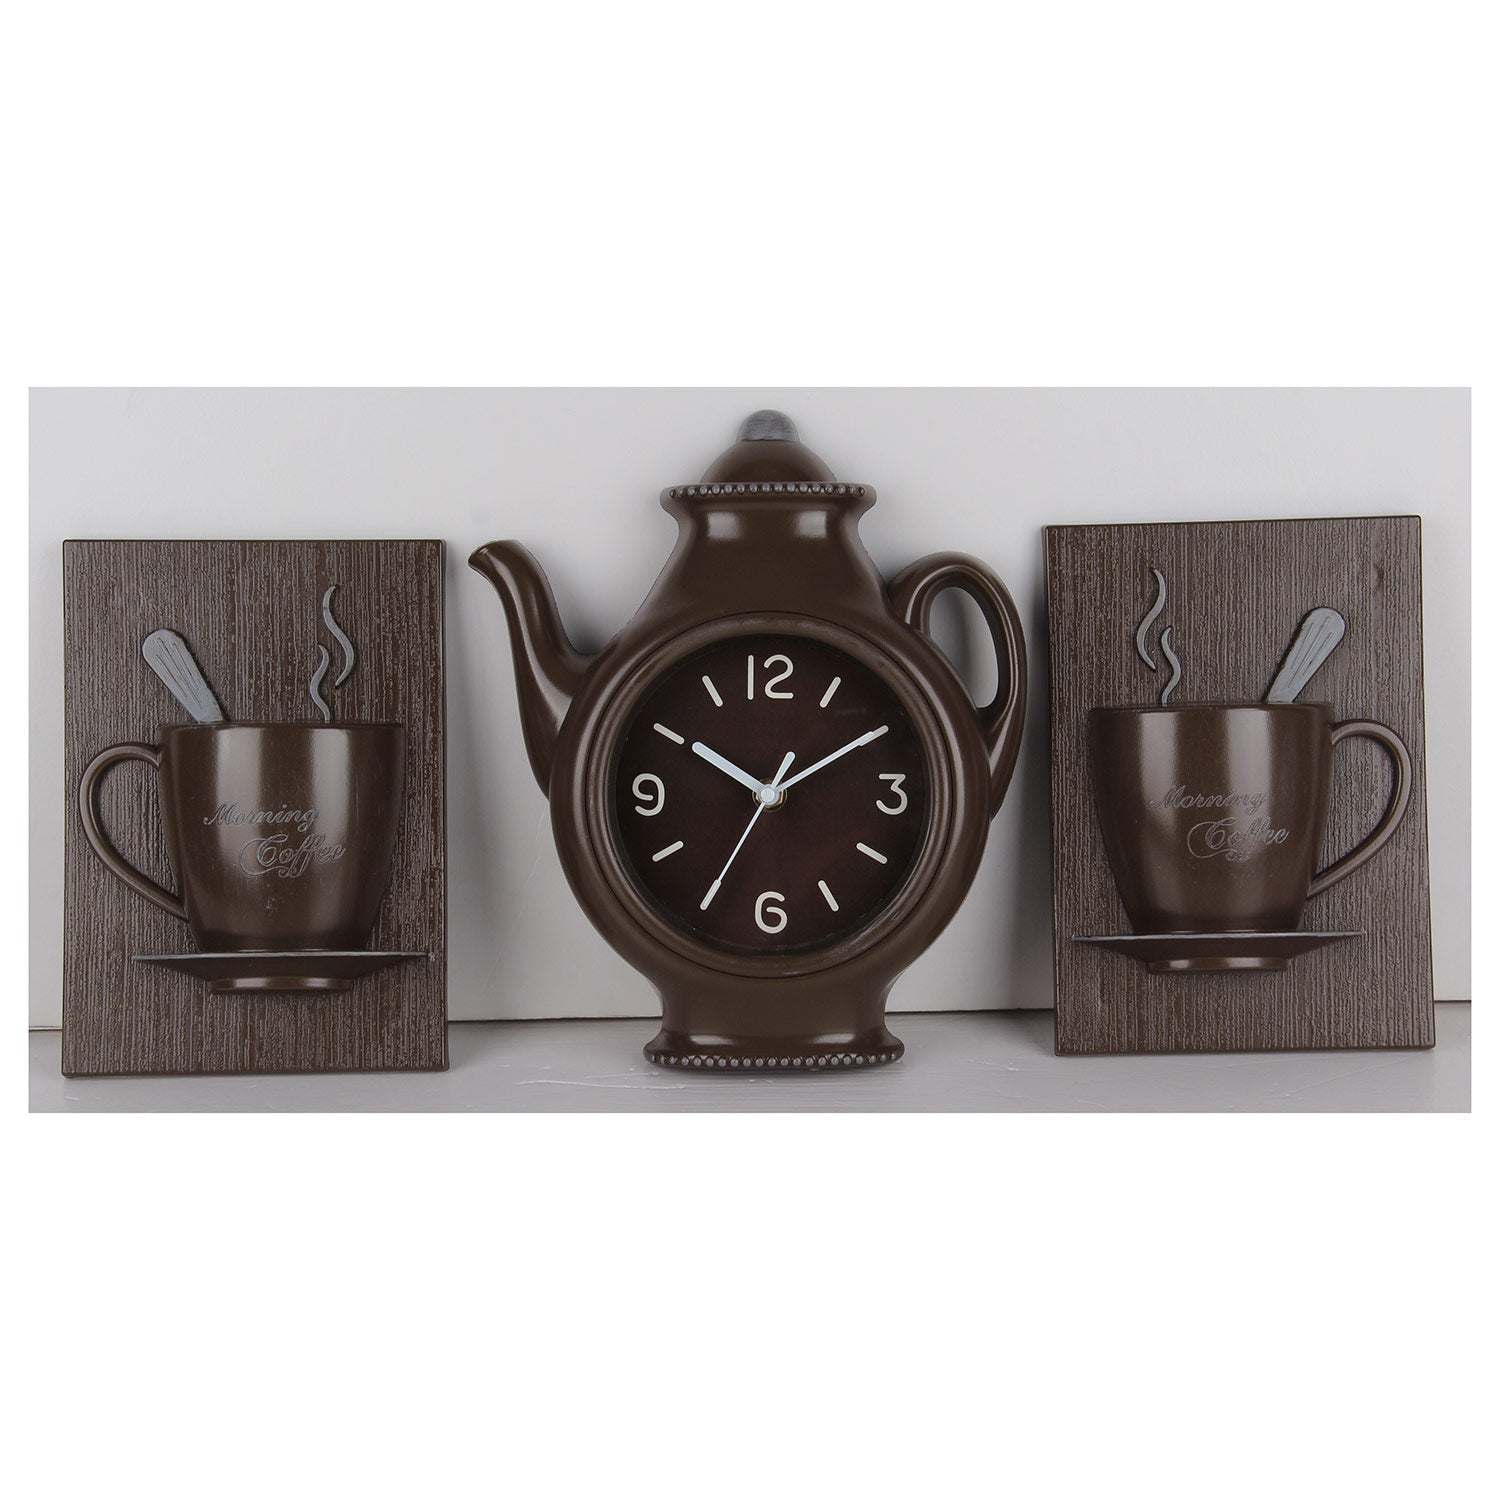 PREMIUS 3 Piece Coffee Wall Clock with Mugs Accent, Brown, 9x11 Inches